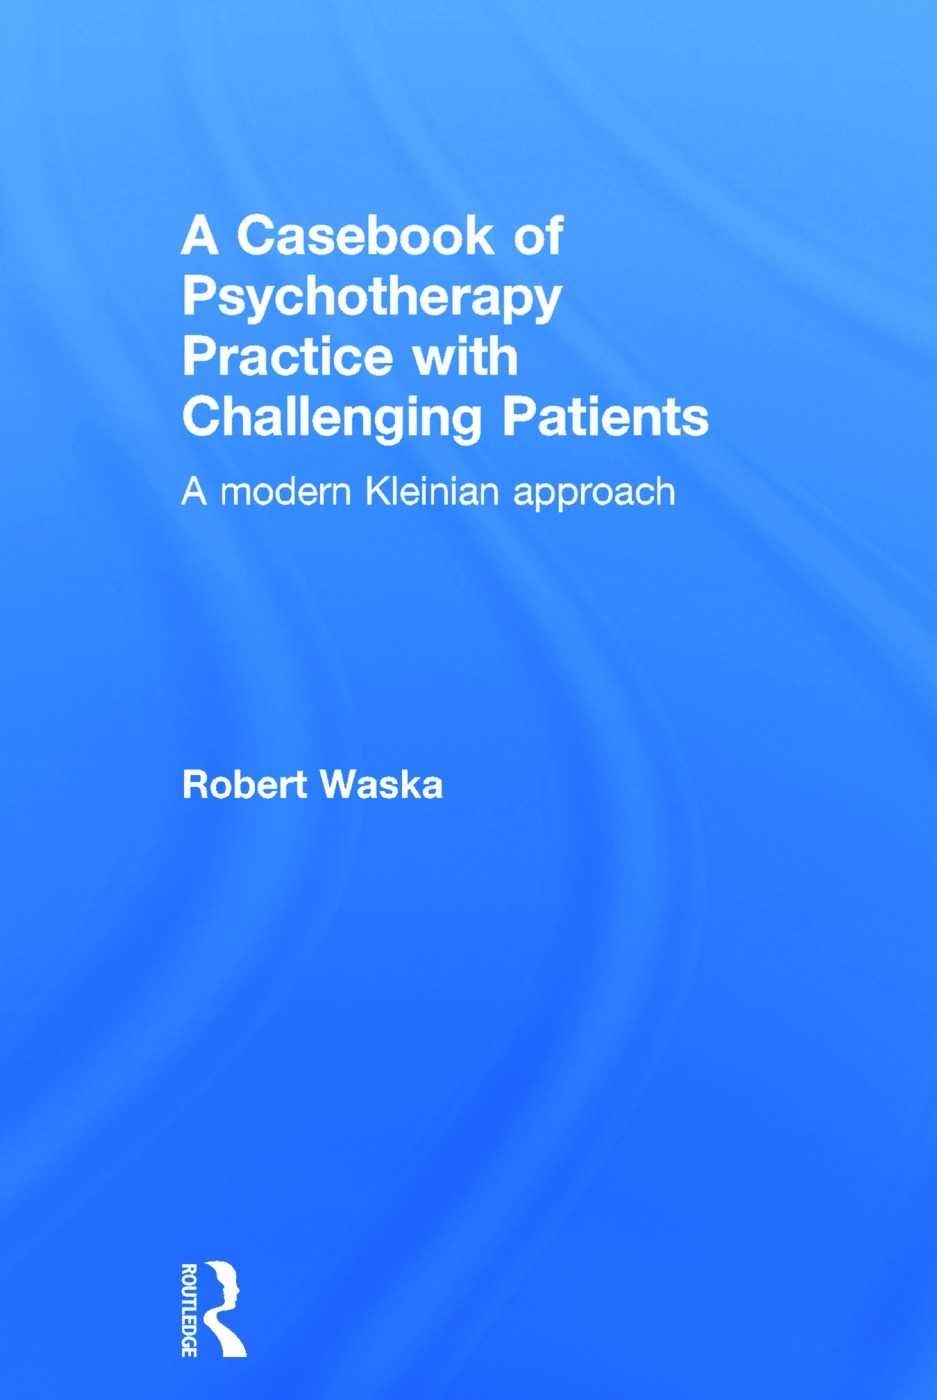 A Casebook of Psychotherapy Practice With Challenging Patients: A Modern Kleinian Approach